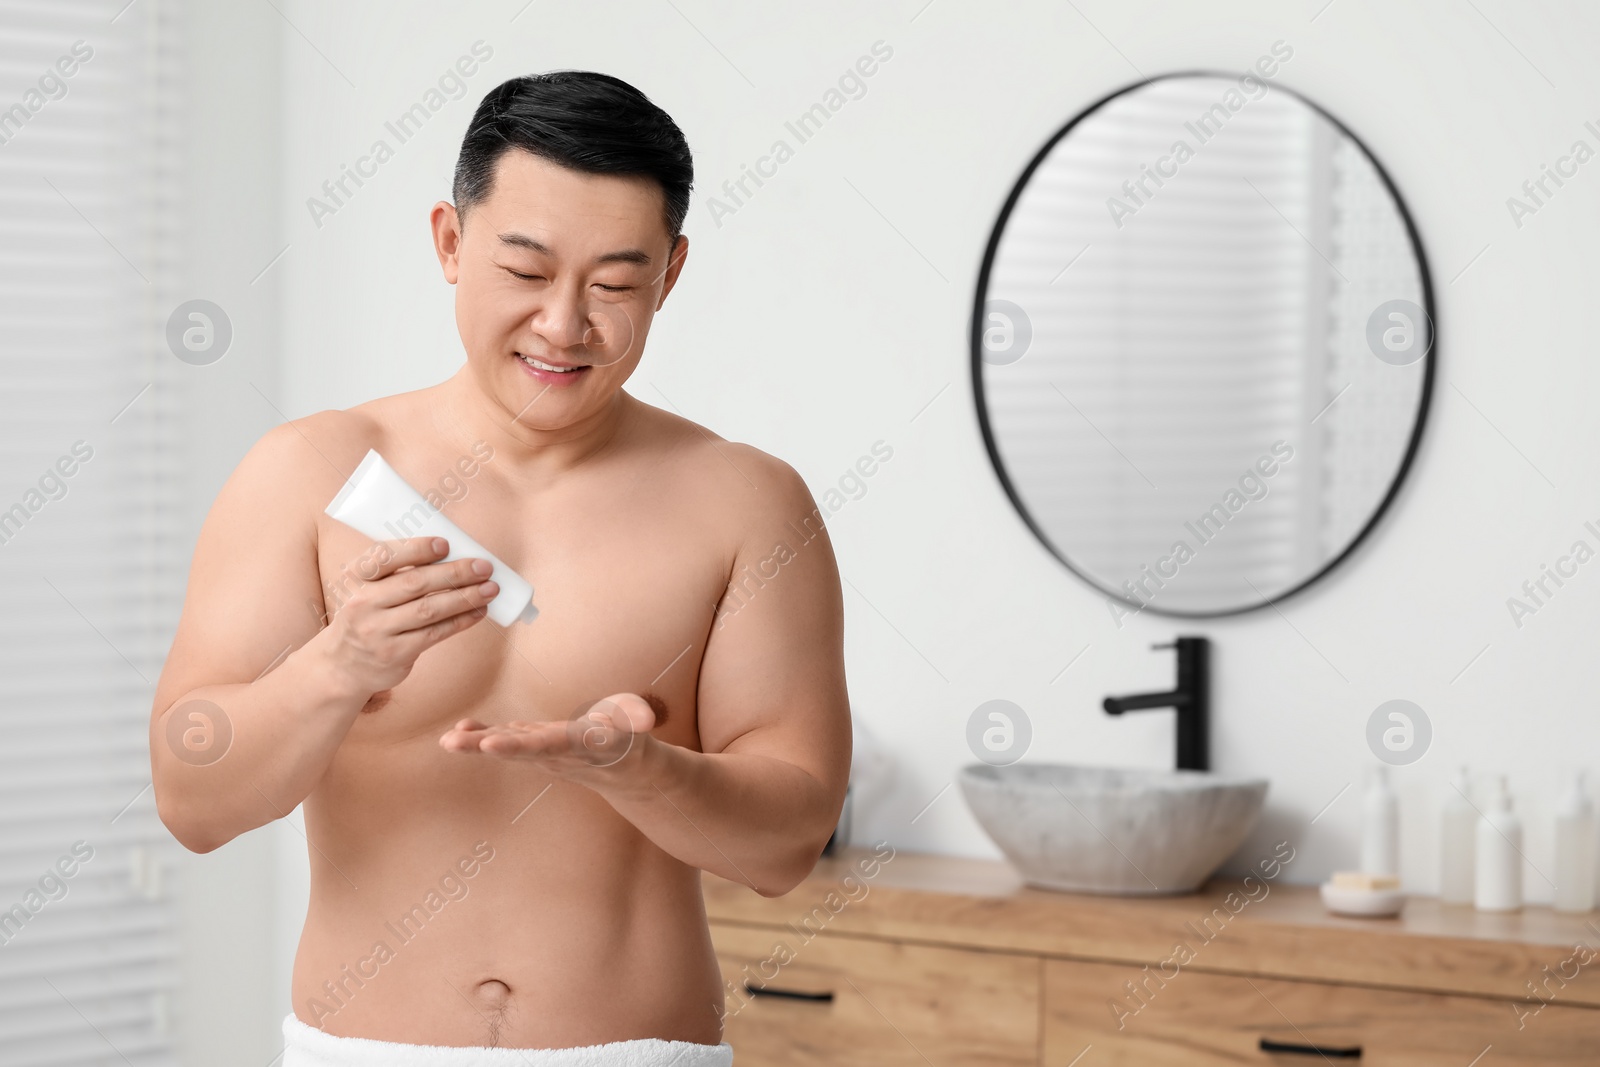 Photo of Handsome man applying body cream onto his hand in bathroom. Space for text